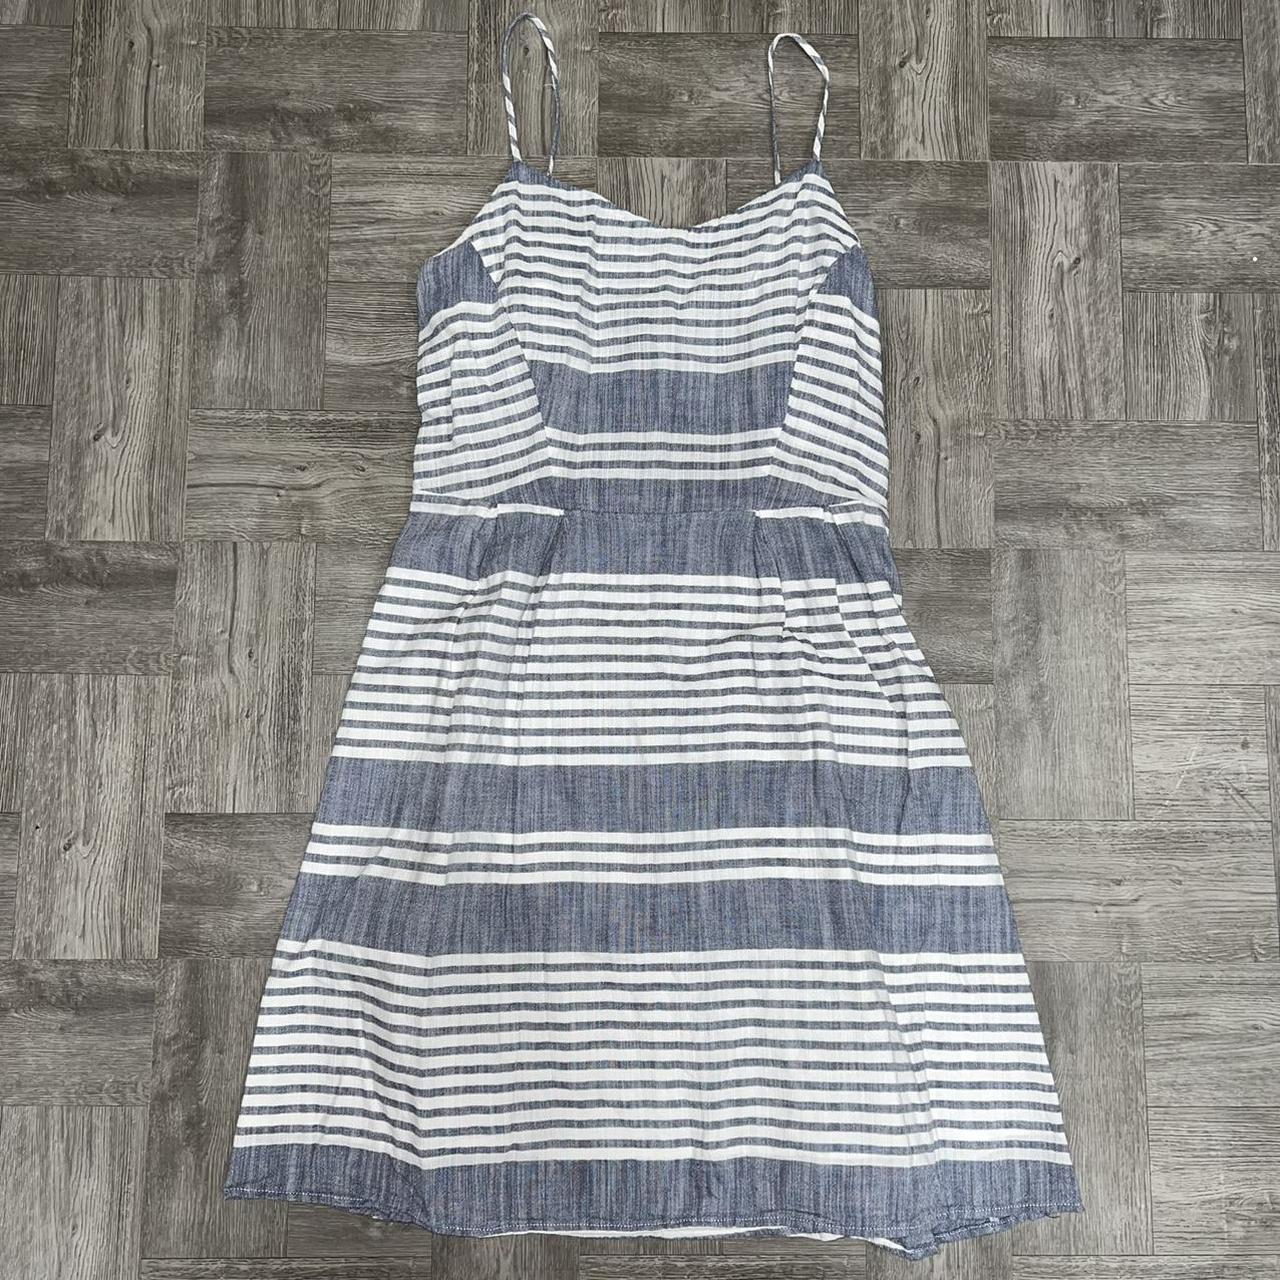 Product Image 1 - NWOT Old Navy blue and